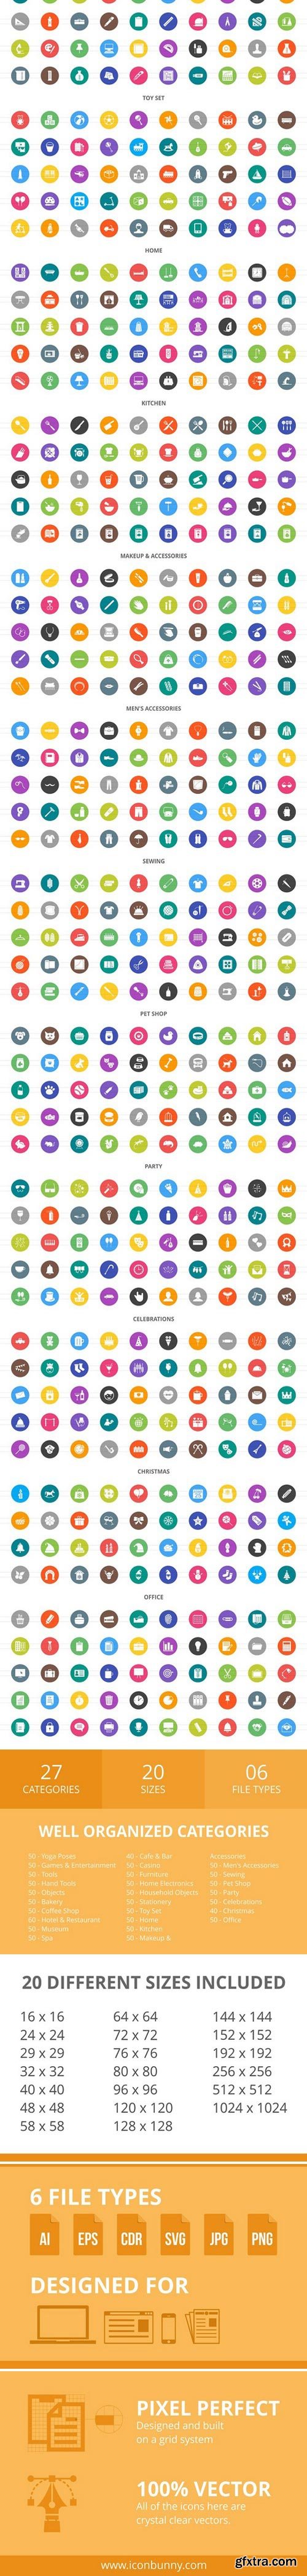 CM - 1340 Indoors Filled Round Icons 2428207